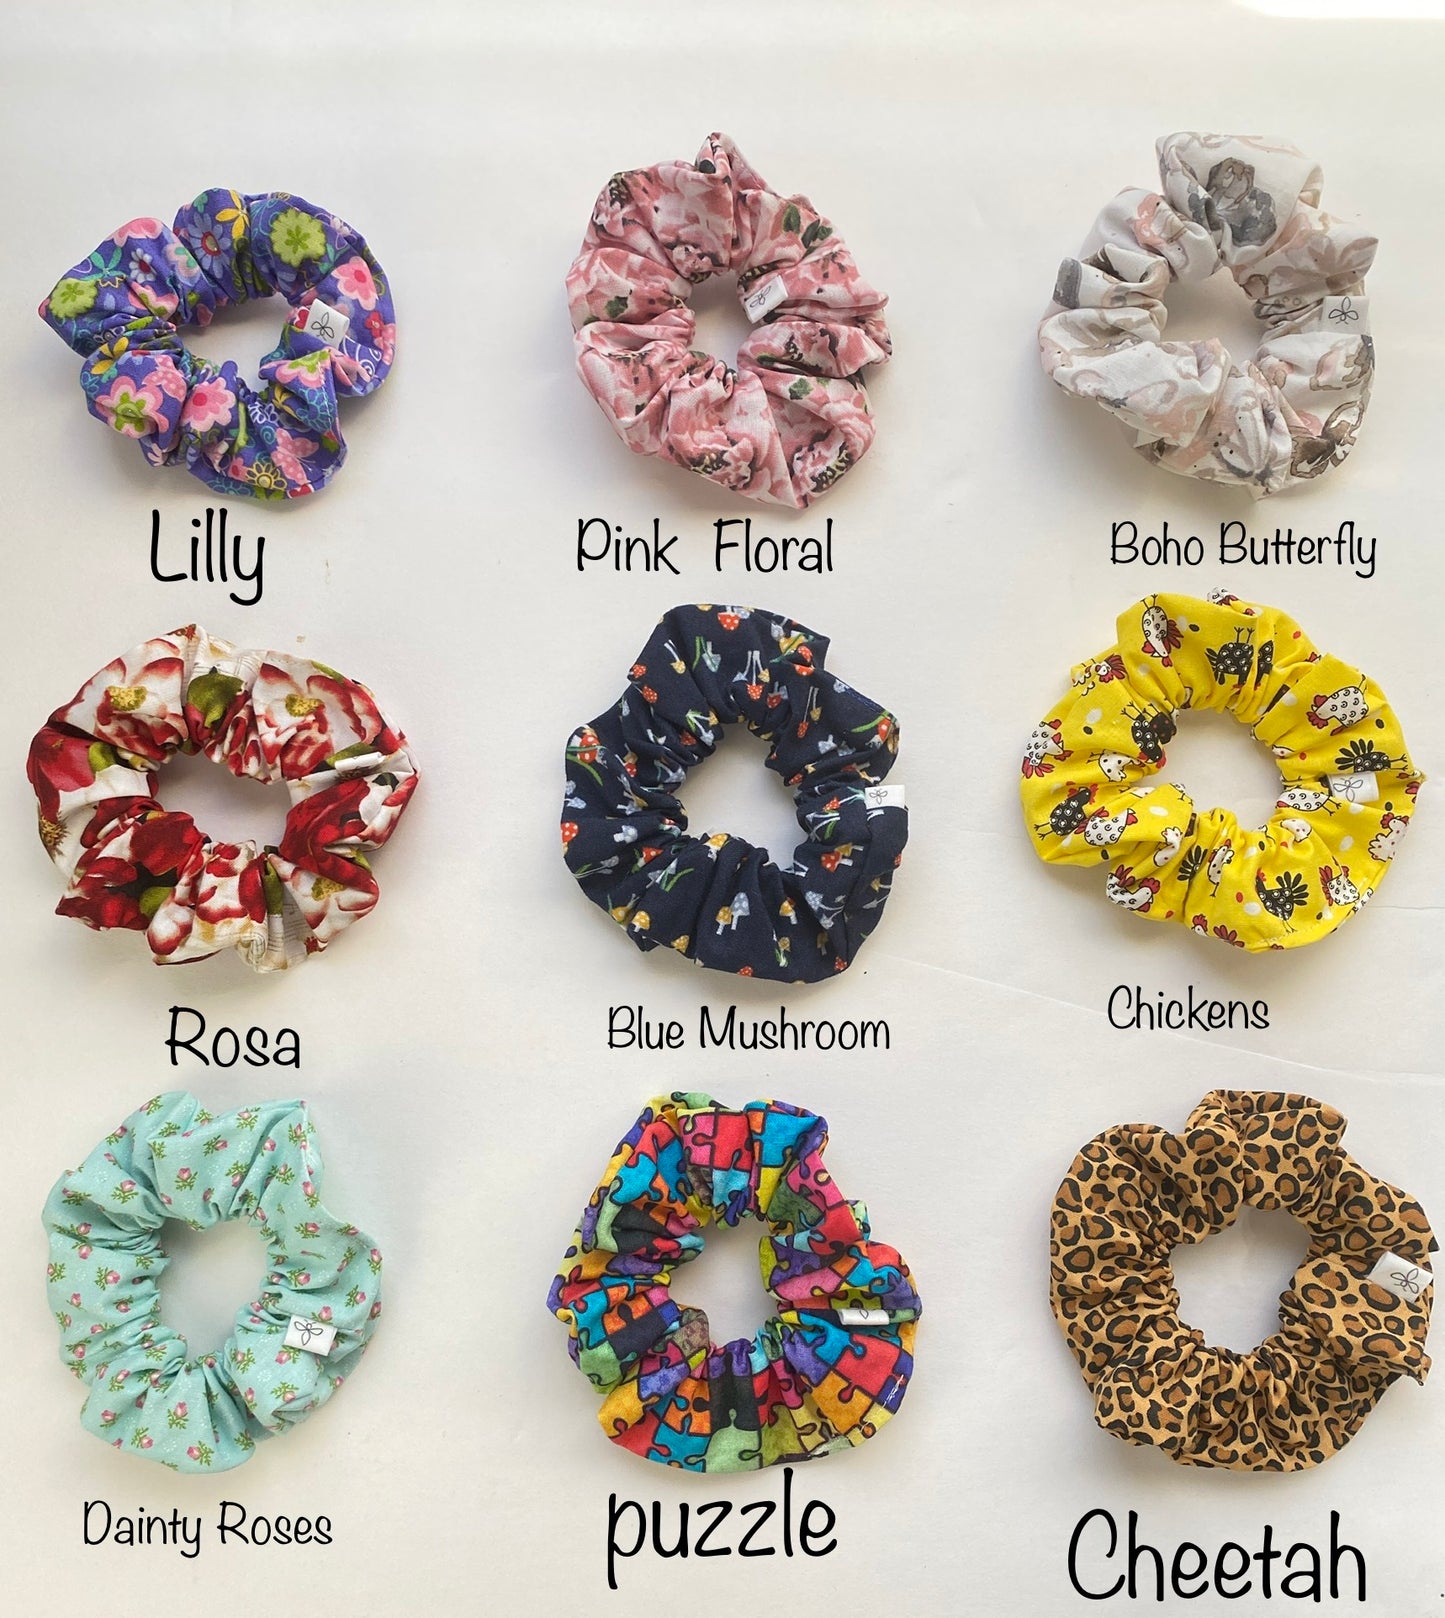 Colorful assortment of patterned scrunchies, vibrate collection of hair ties for a trendy look added to your ponytail or messy bun.